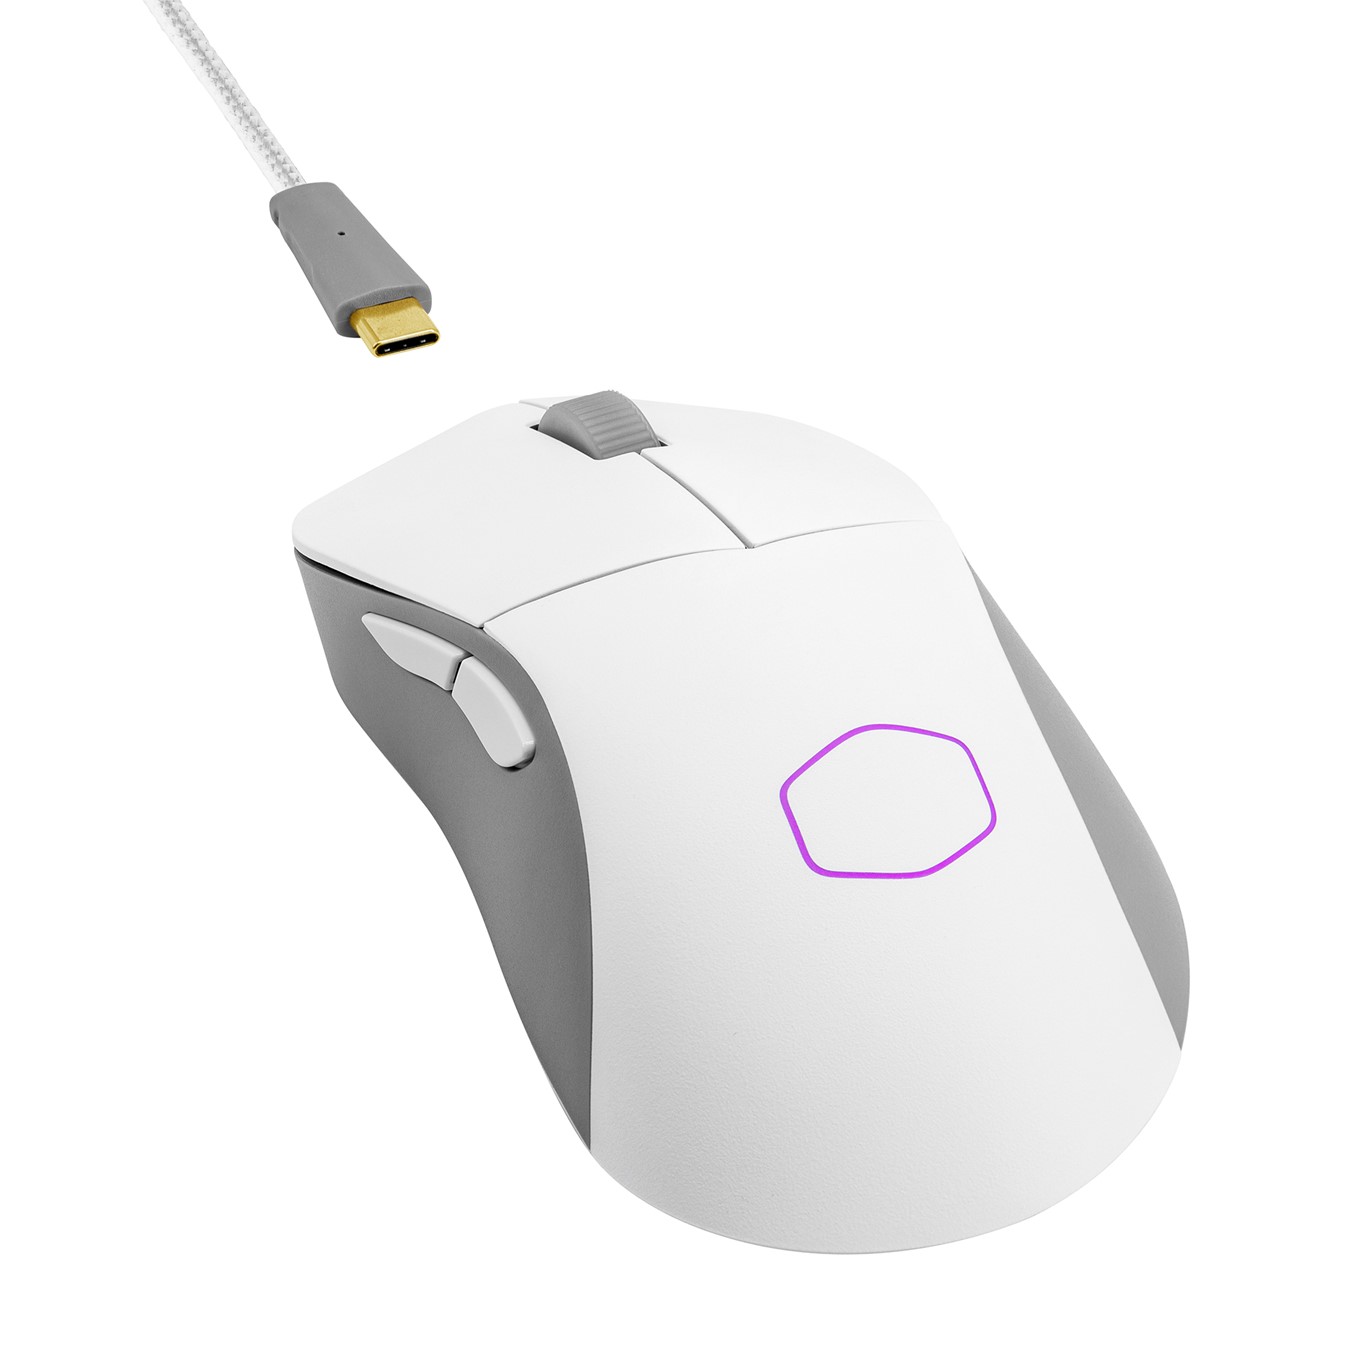 COOLER MASTER MM731 WIRELESS GAMING MOUSE - WHITE - MM-731-WWOH1